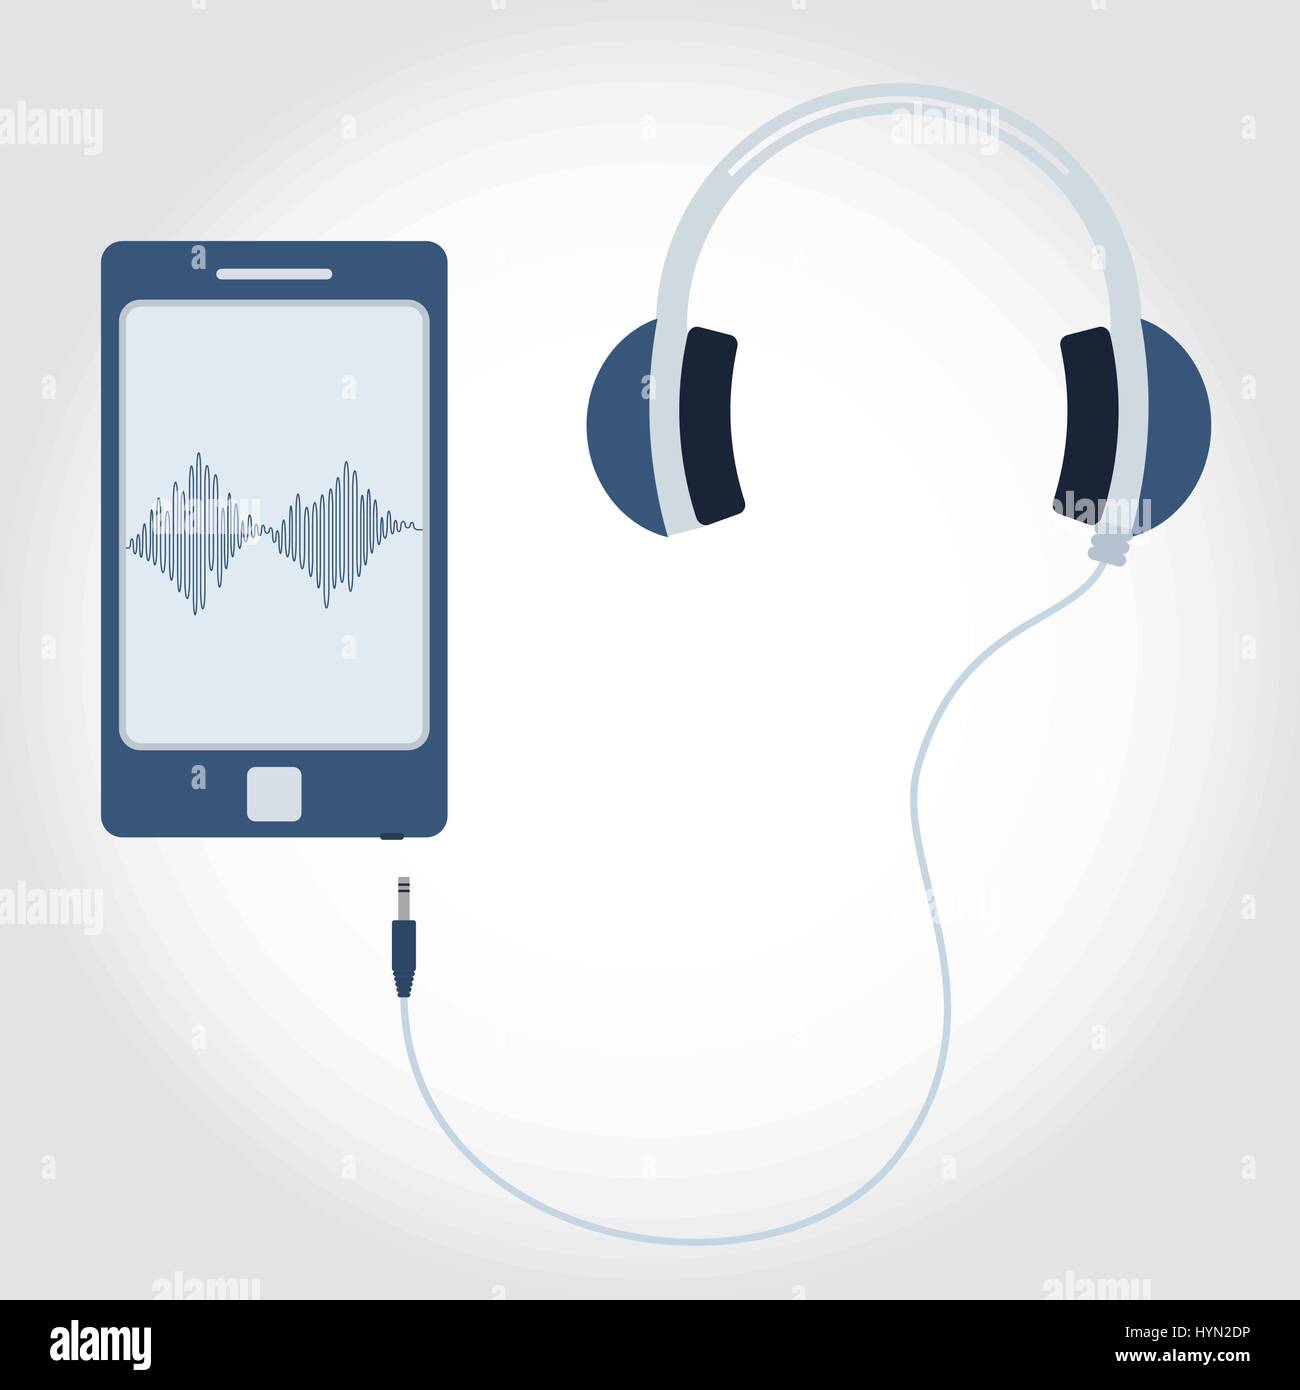 Phone and cable with plug and headphone. Sound wave symbol showing on monitor. Flat design. Stock Vector